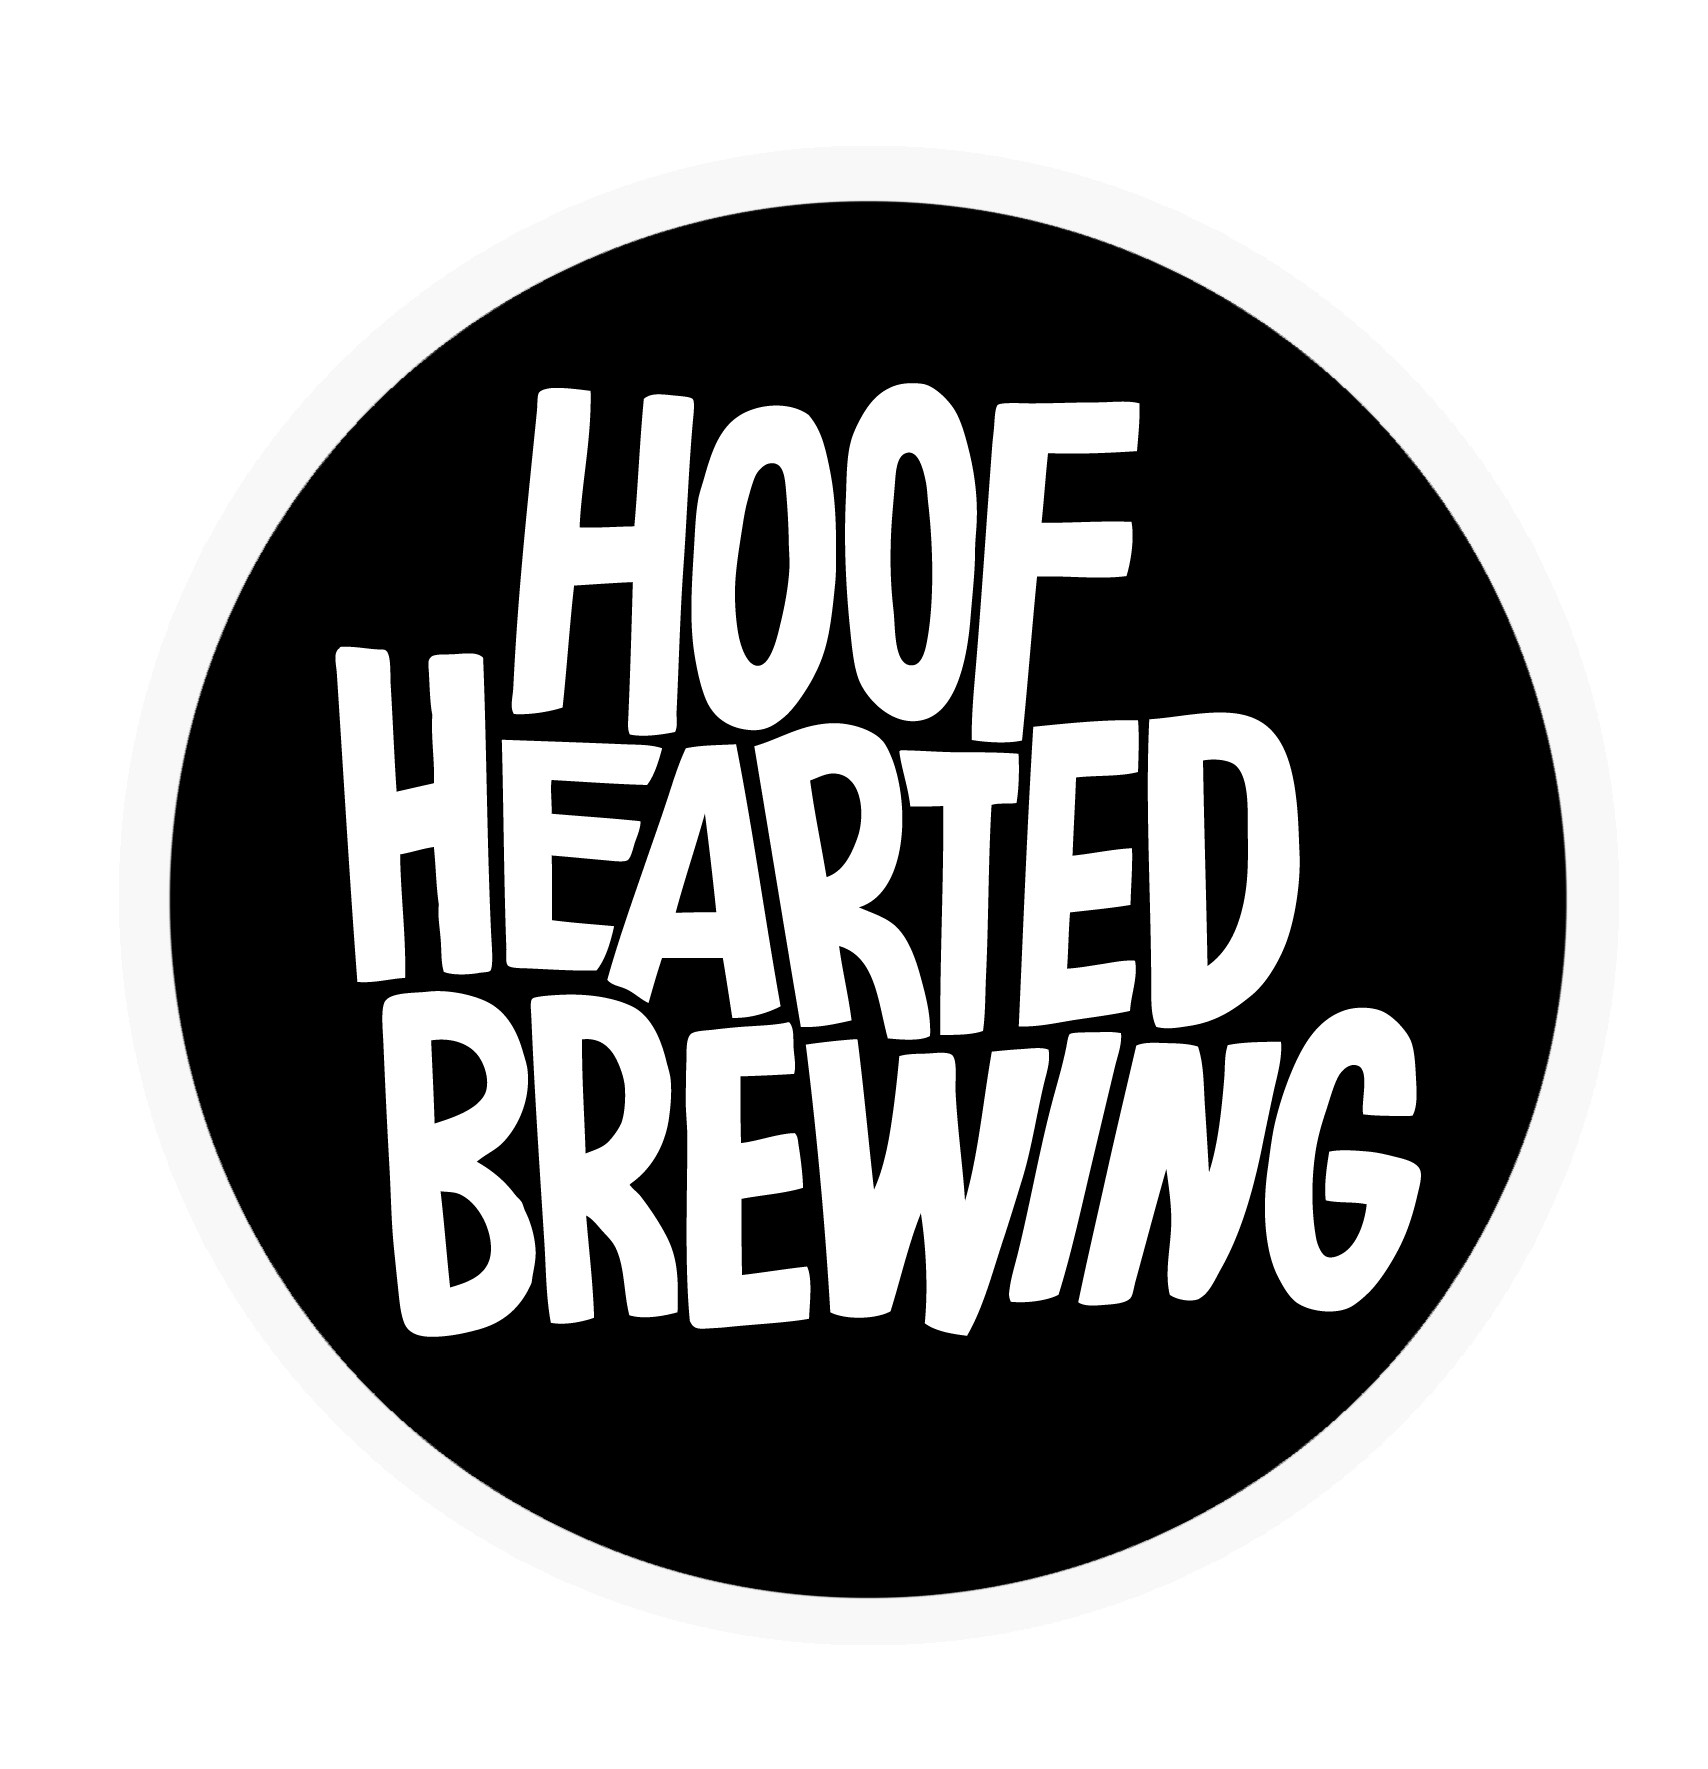 Hoof Hearted Brewery & Kitchen